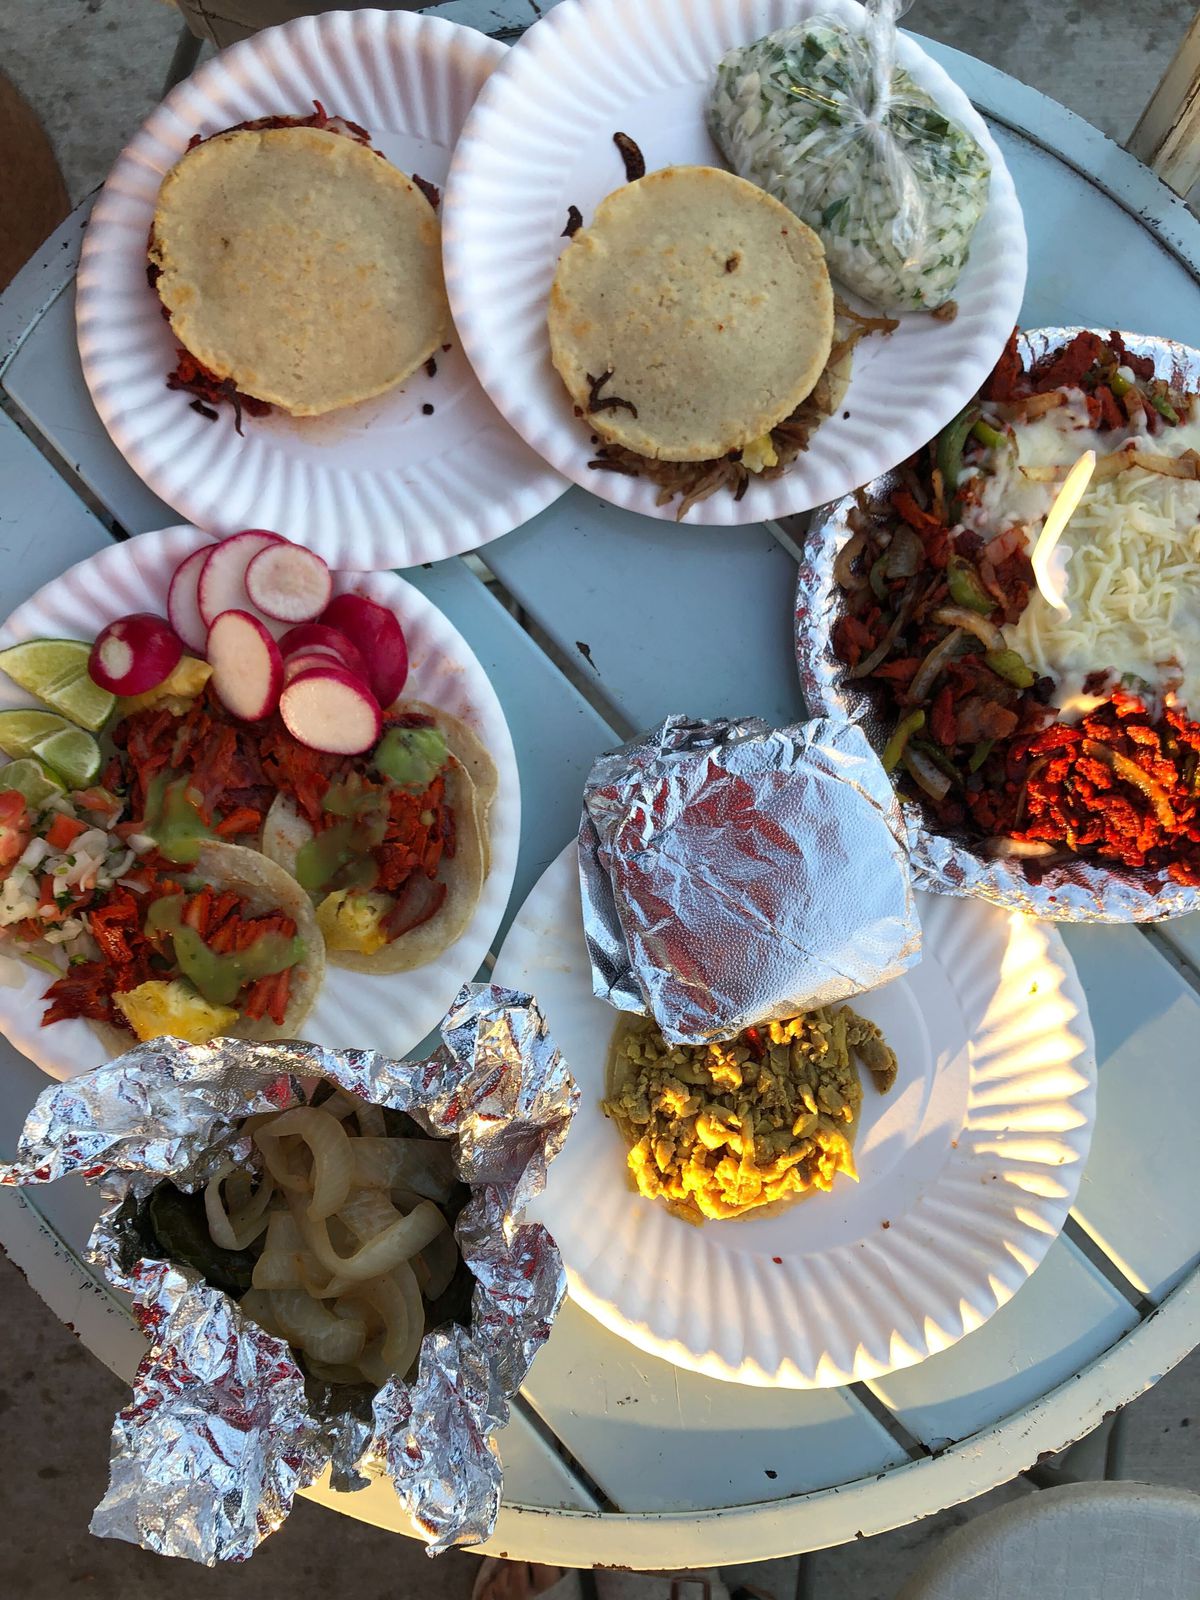 A wooden table laden with tacos on paper plates.